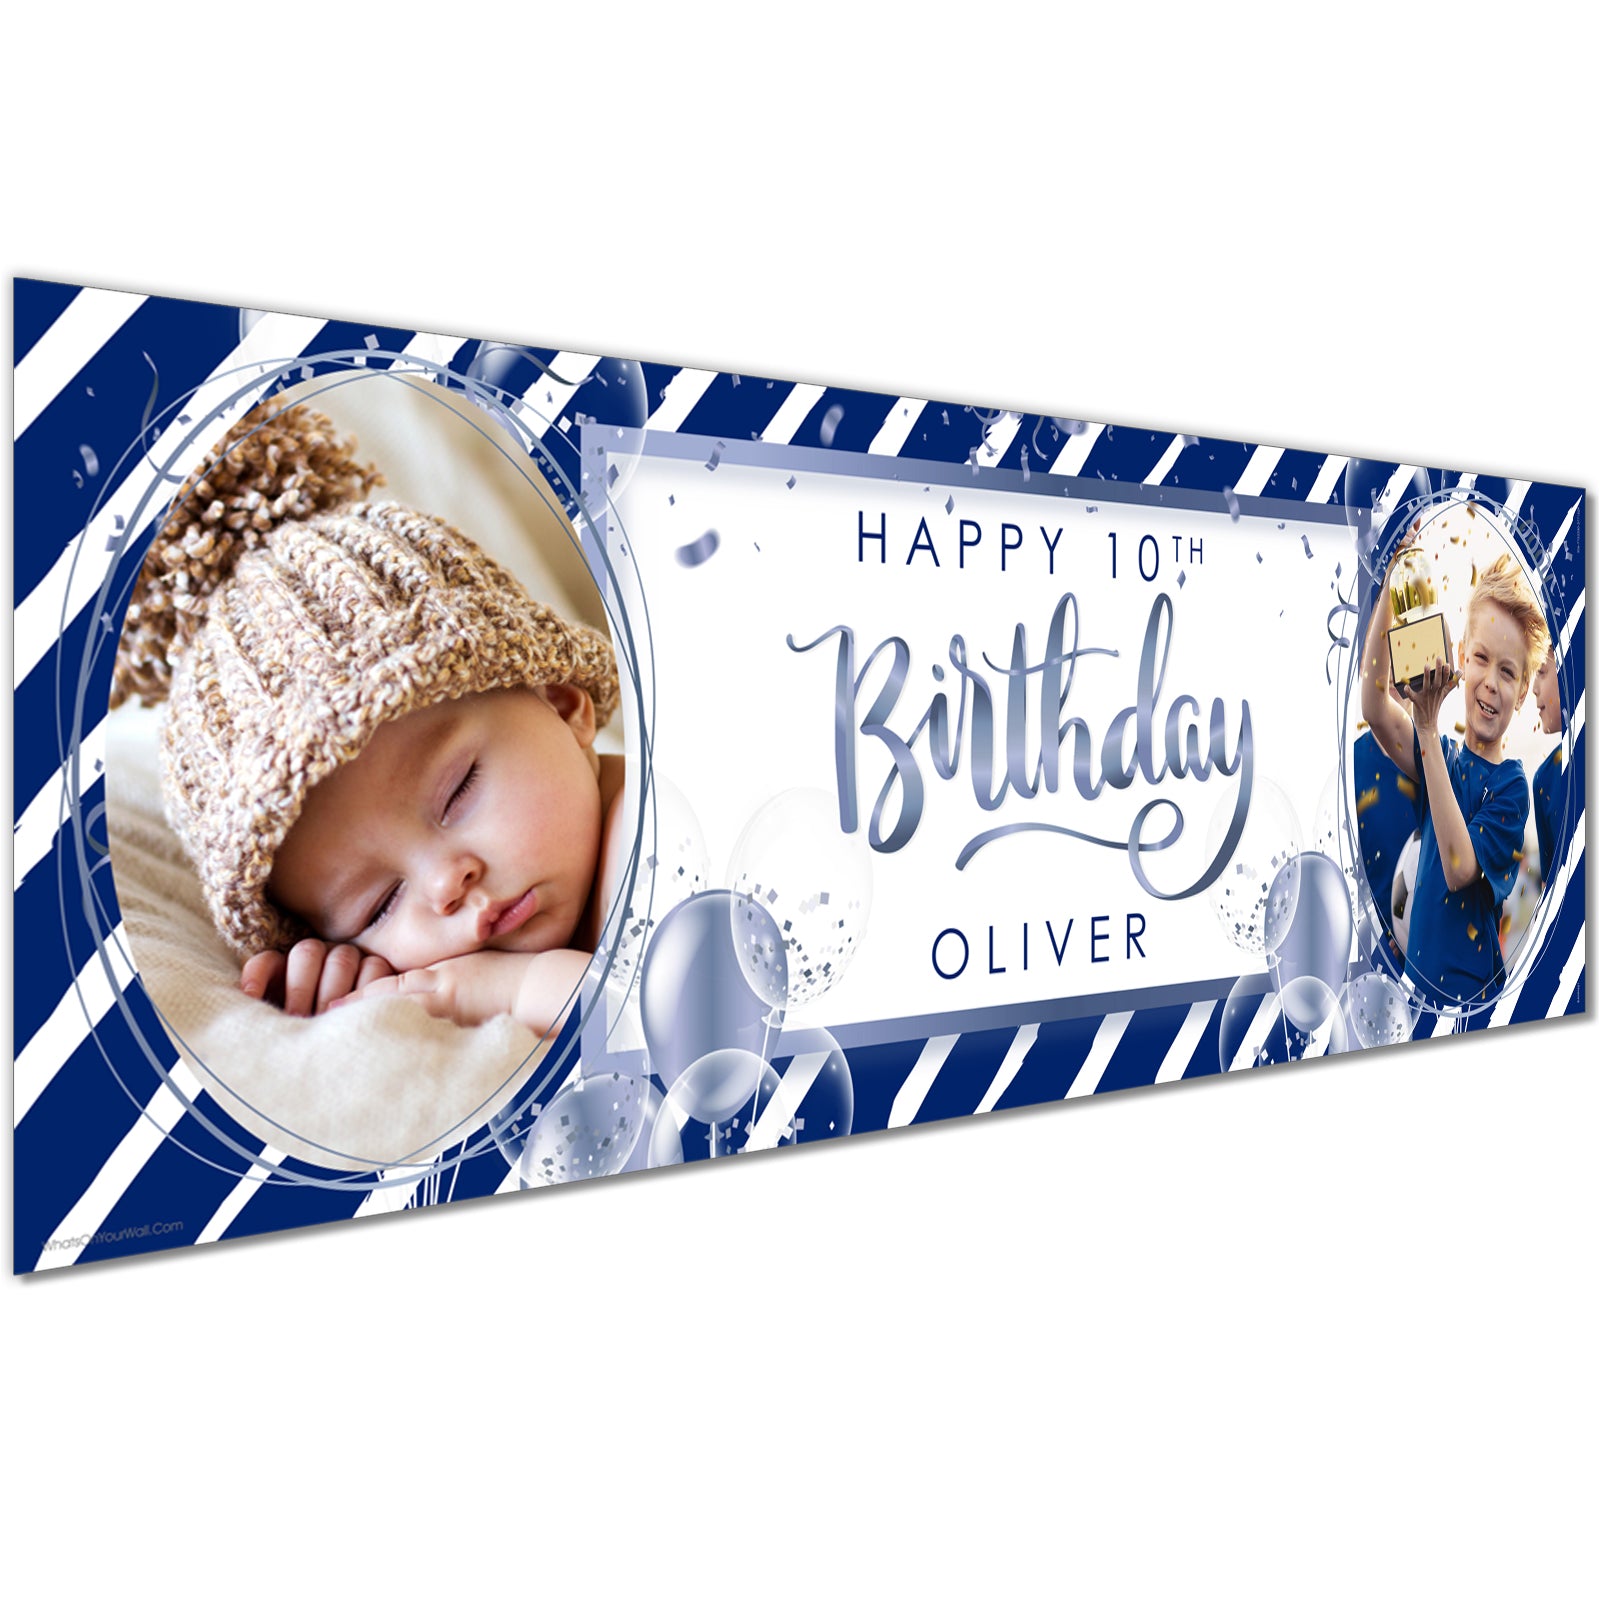 Personalised Birthday Banners in Navy White Stripes